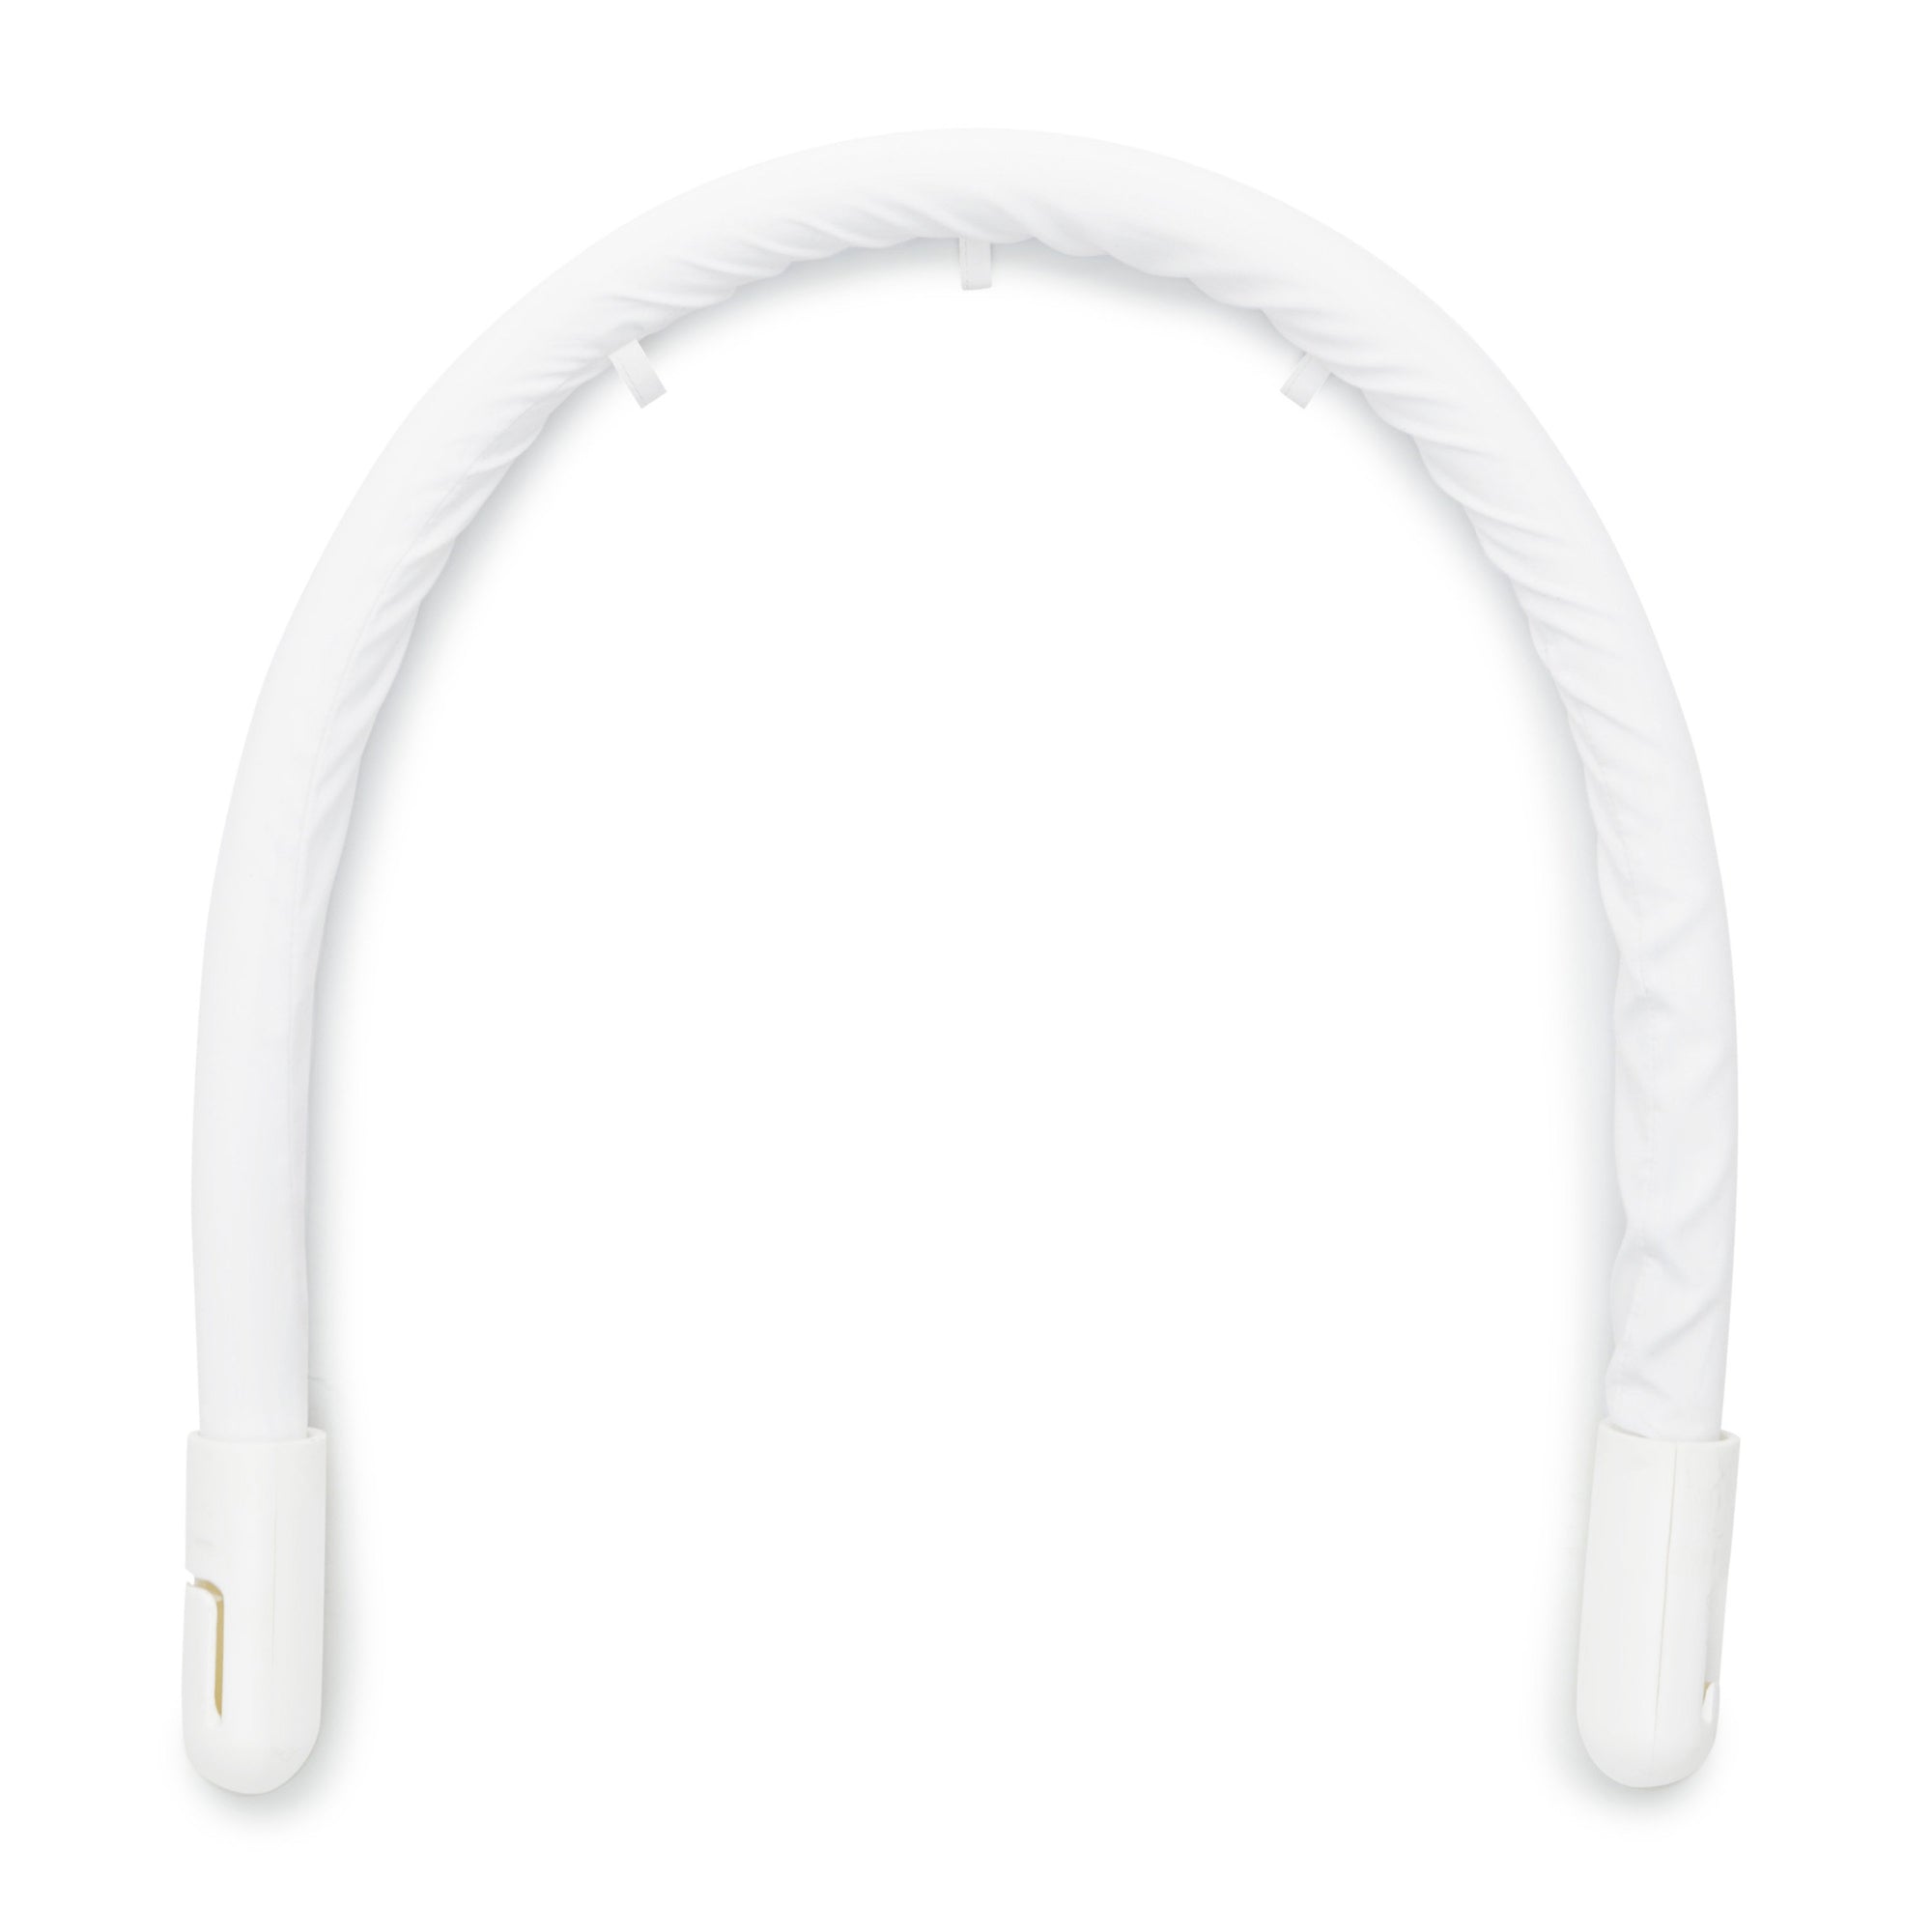 Toy Arch for Deluxe+ Dock Pristine White - Out of Stock